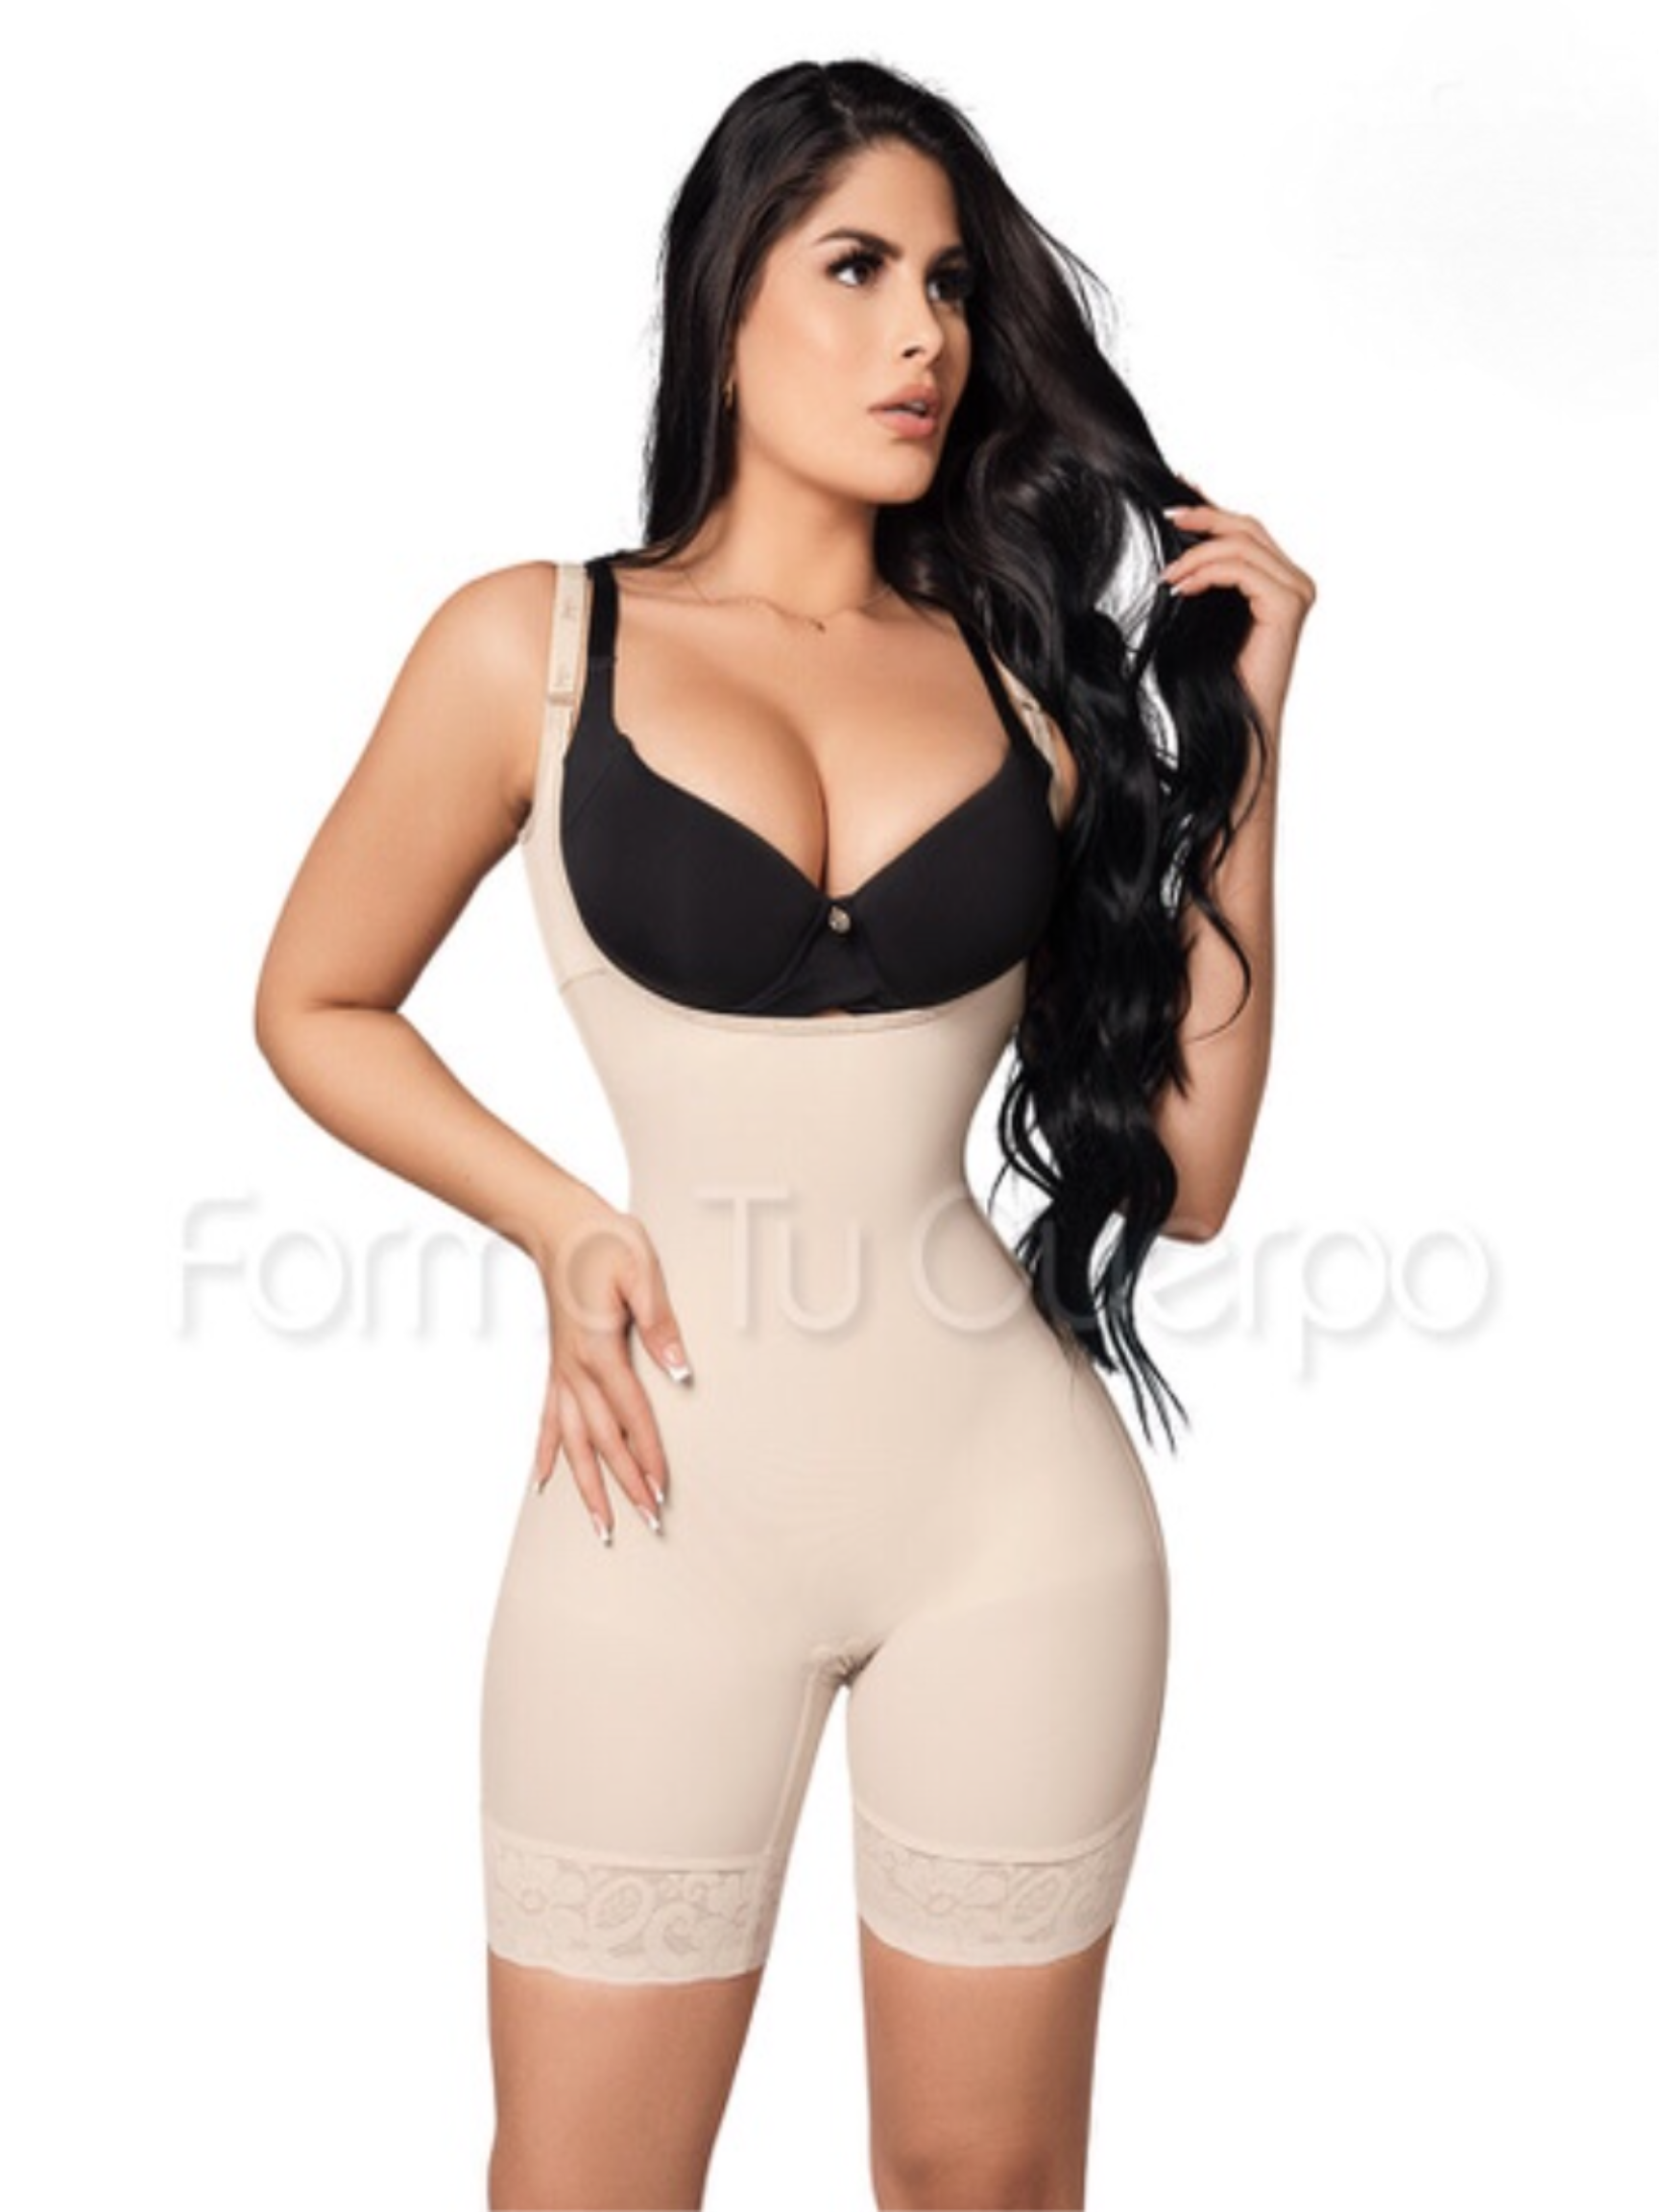 Model 4001 - Invisible Firming and Toning Body Shaper w/Adjustable